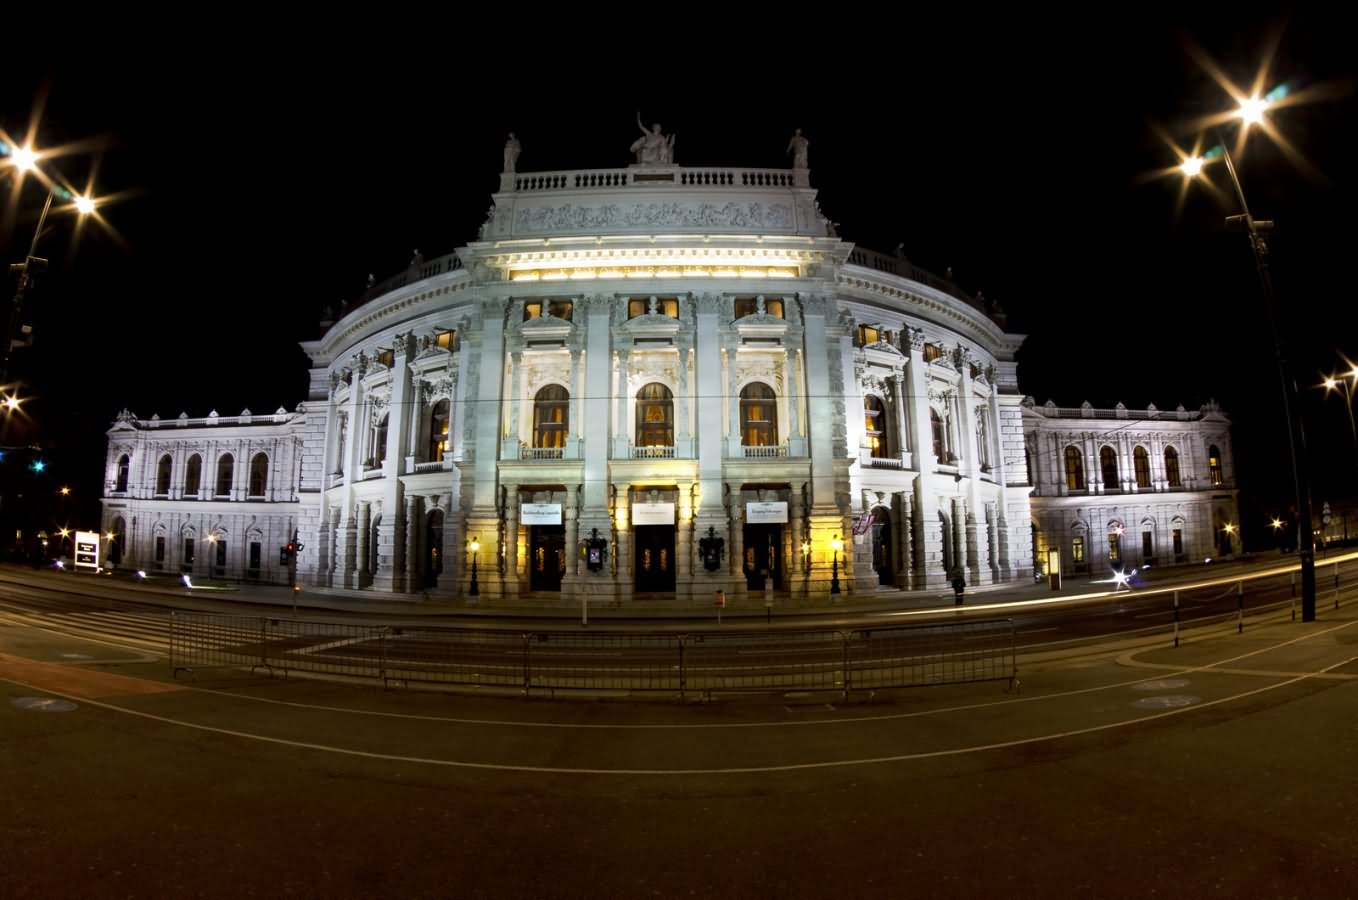 The Burgtheater Night View Across The Road In Vienna